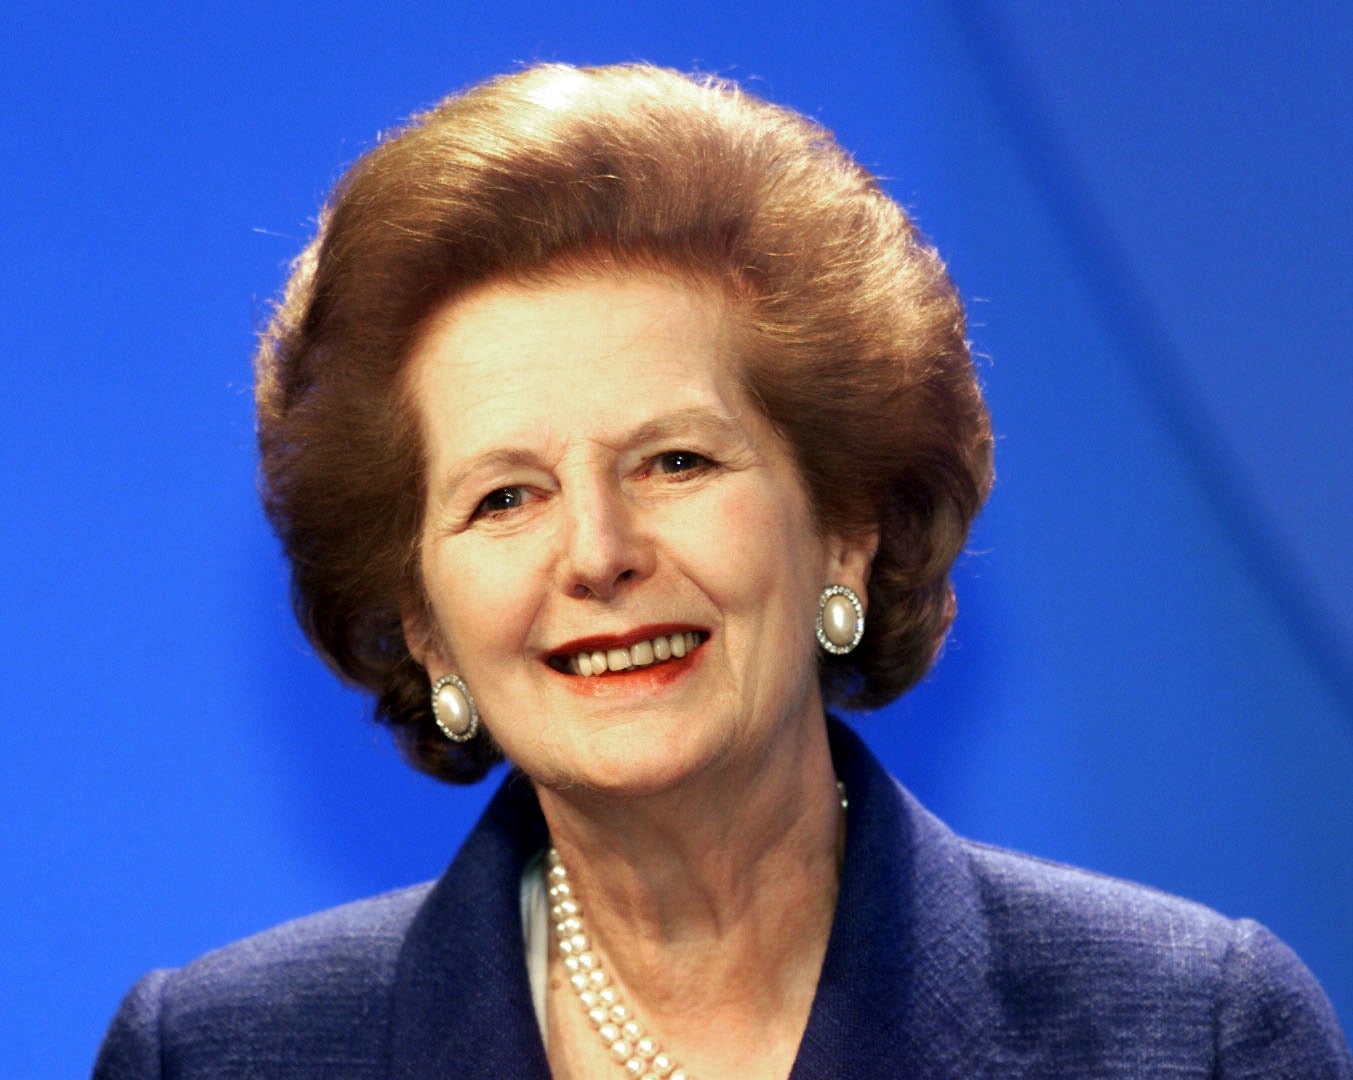 Mrs Thatcher’s government considered invoking emergency wartime powers to prevent people from bringing copies of the book into the UK